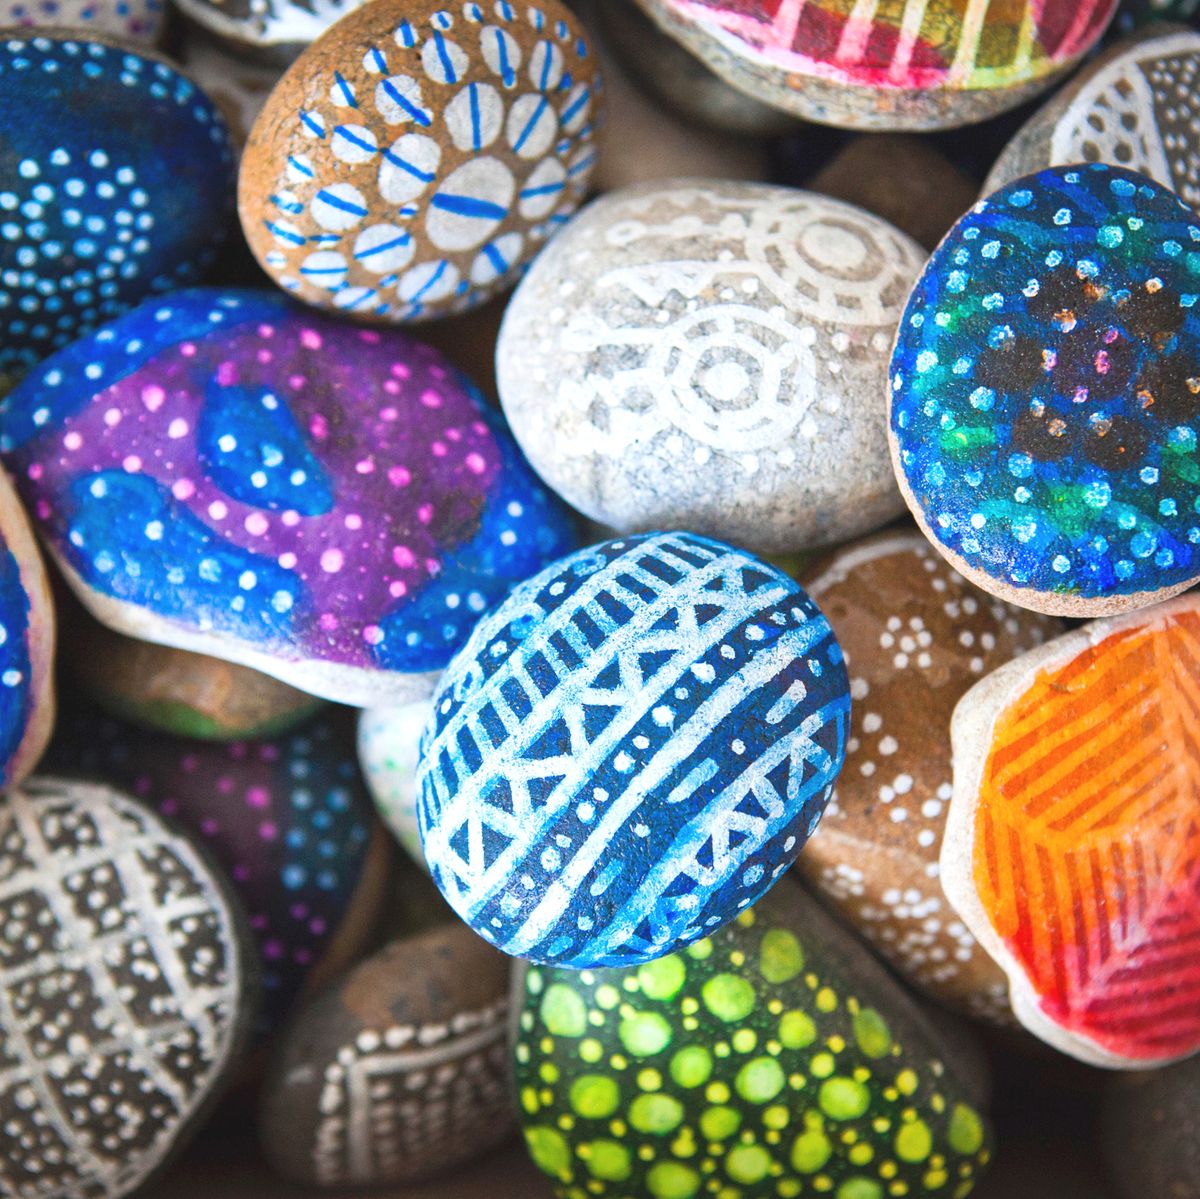 Stone Painting for Kids. Rocks + paint = fun!